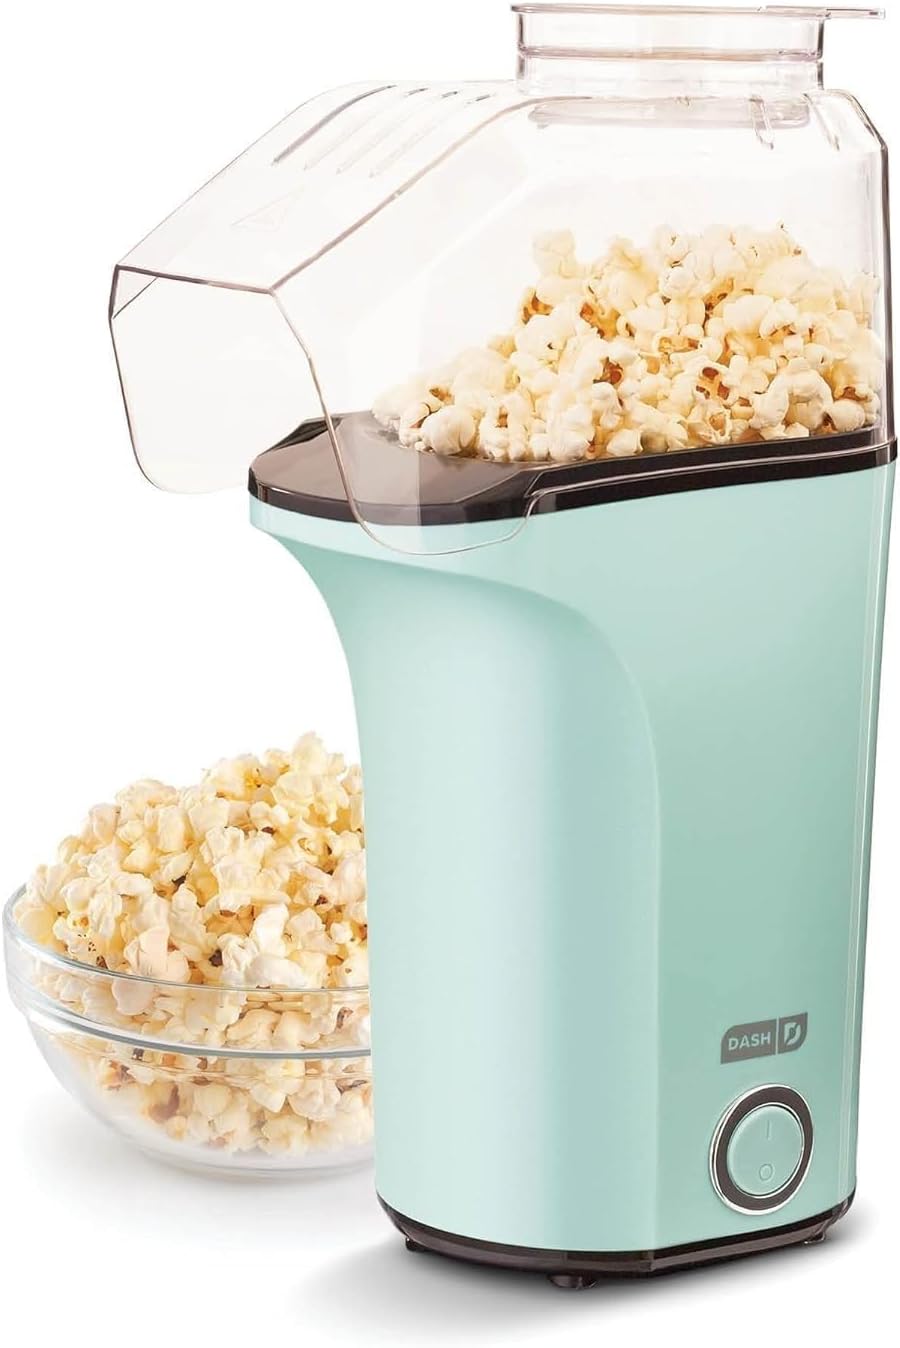 This is my second time purchasing this popcorn popper. I purchased it again because it is just so easy to use ( just pour in kernels and push the button ), and after 2 years, something happened where warm air was still coming out, but popcorn was not popping. I checked to see if it was the popcorn itself, but it was not. This was disappointing. Nevertheless, I re-purchased, and I am back to enjoying quick, easy, tasty popcorn! It does take a little while for the popcorn to start popping, but thi